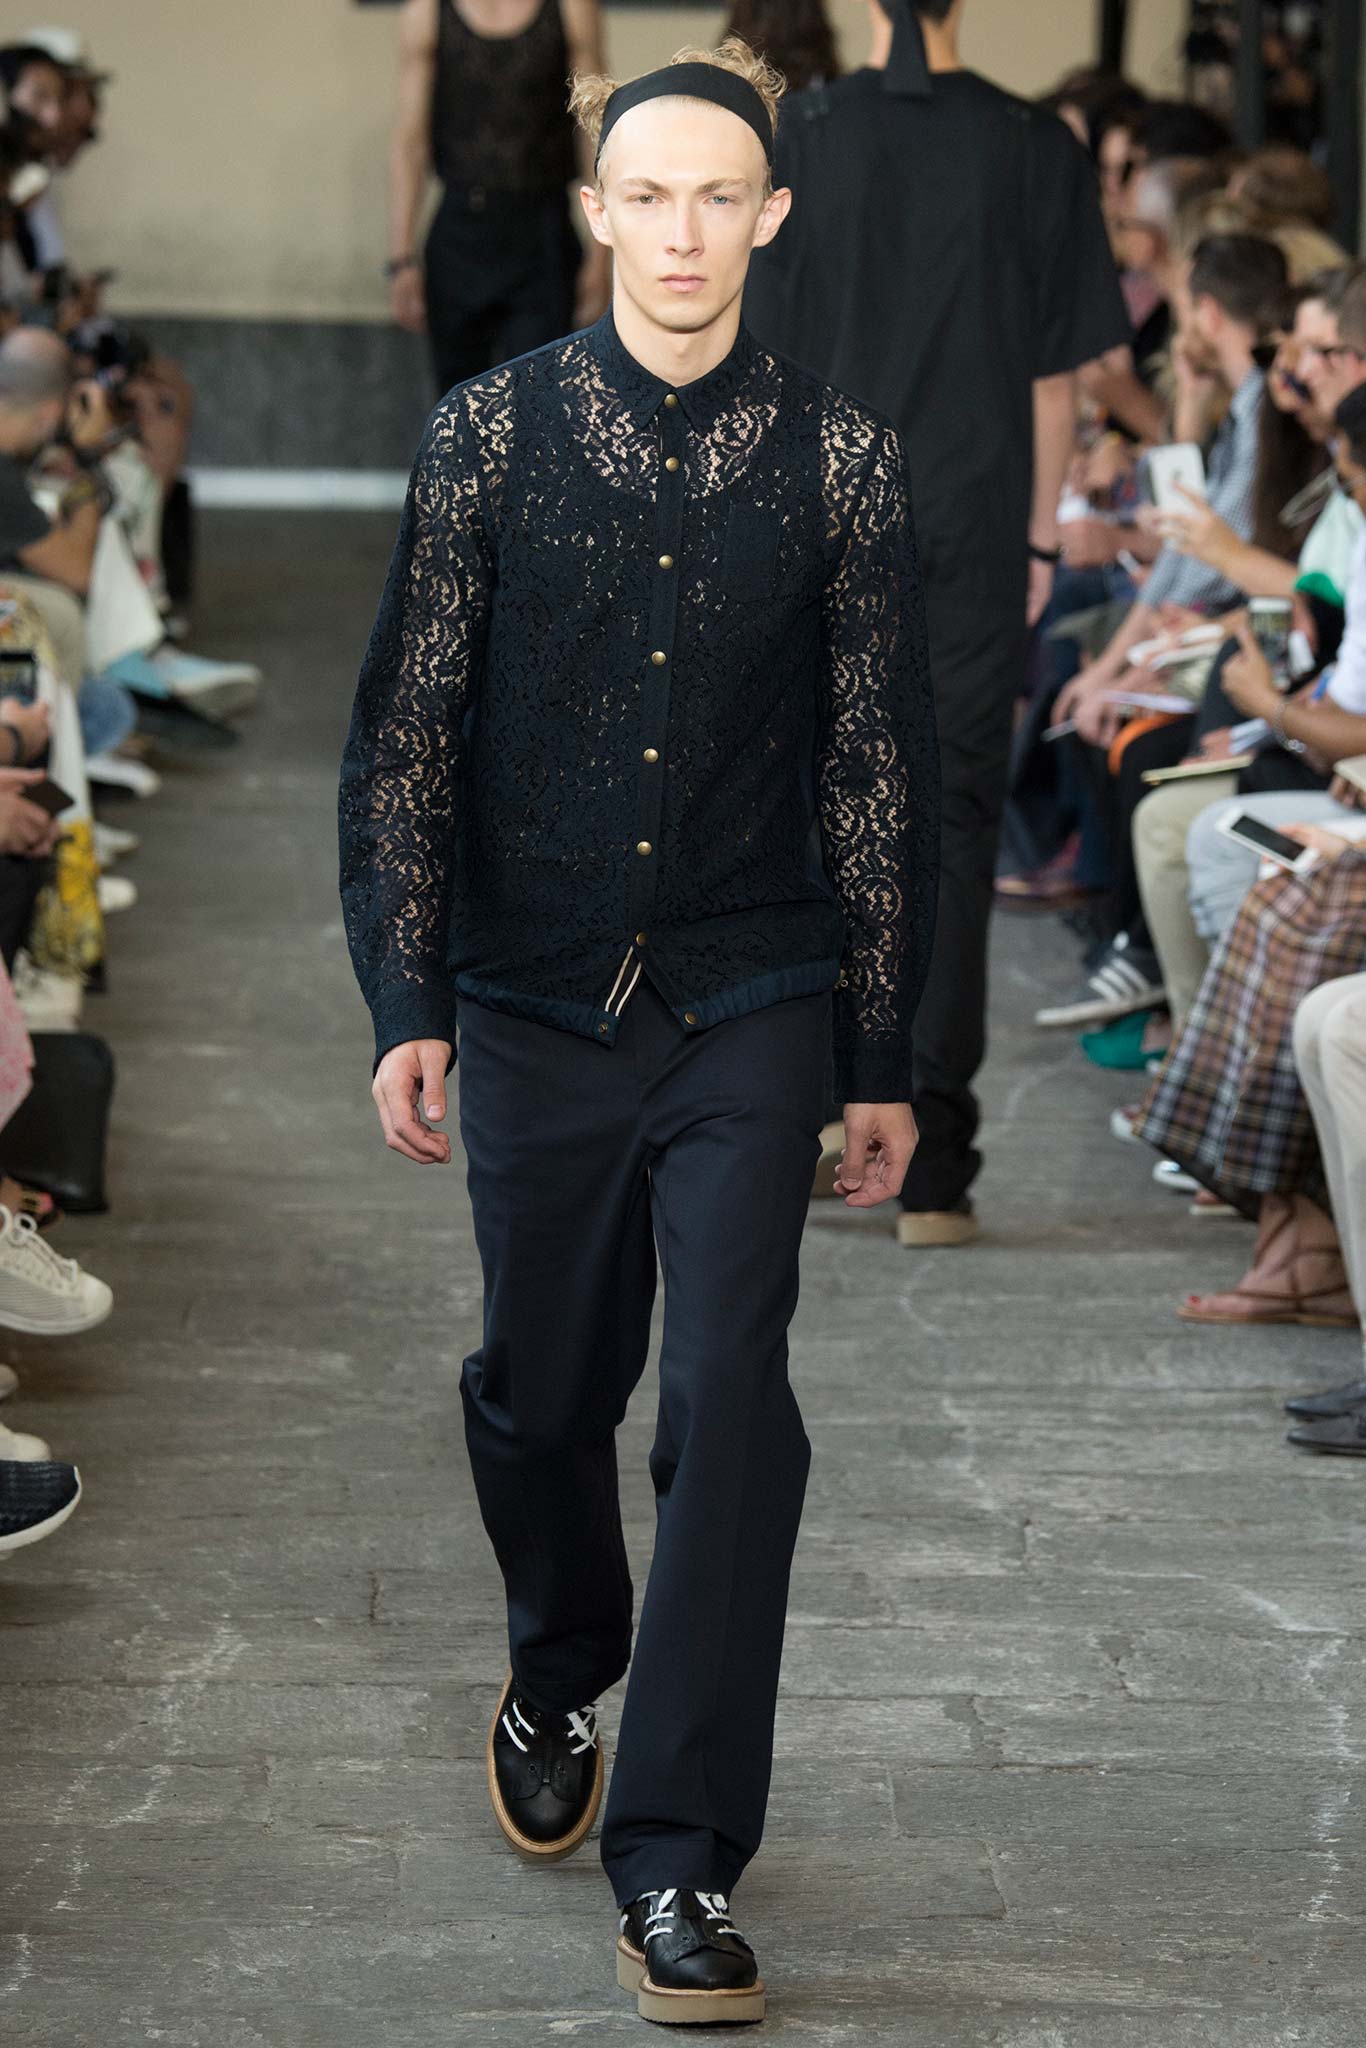 spring-2016-menswear-trends-01-lace-05